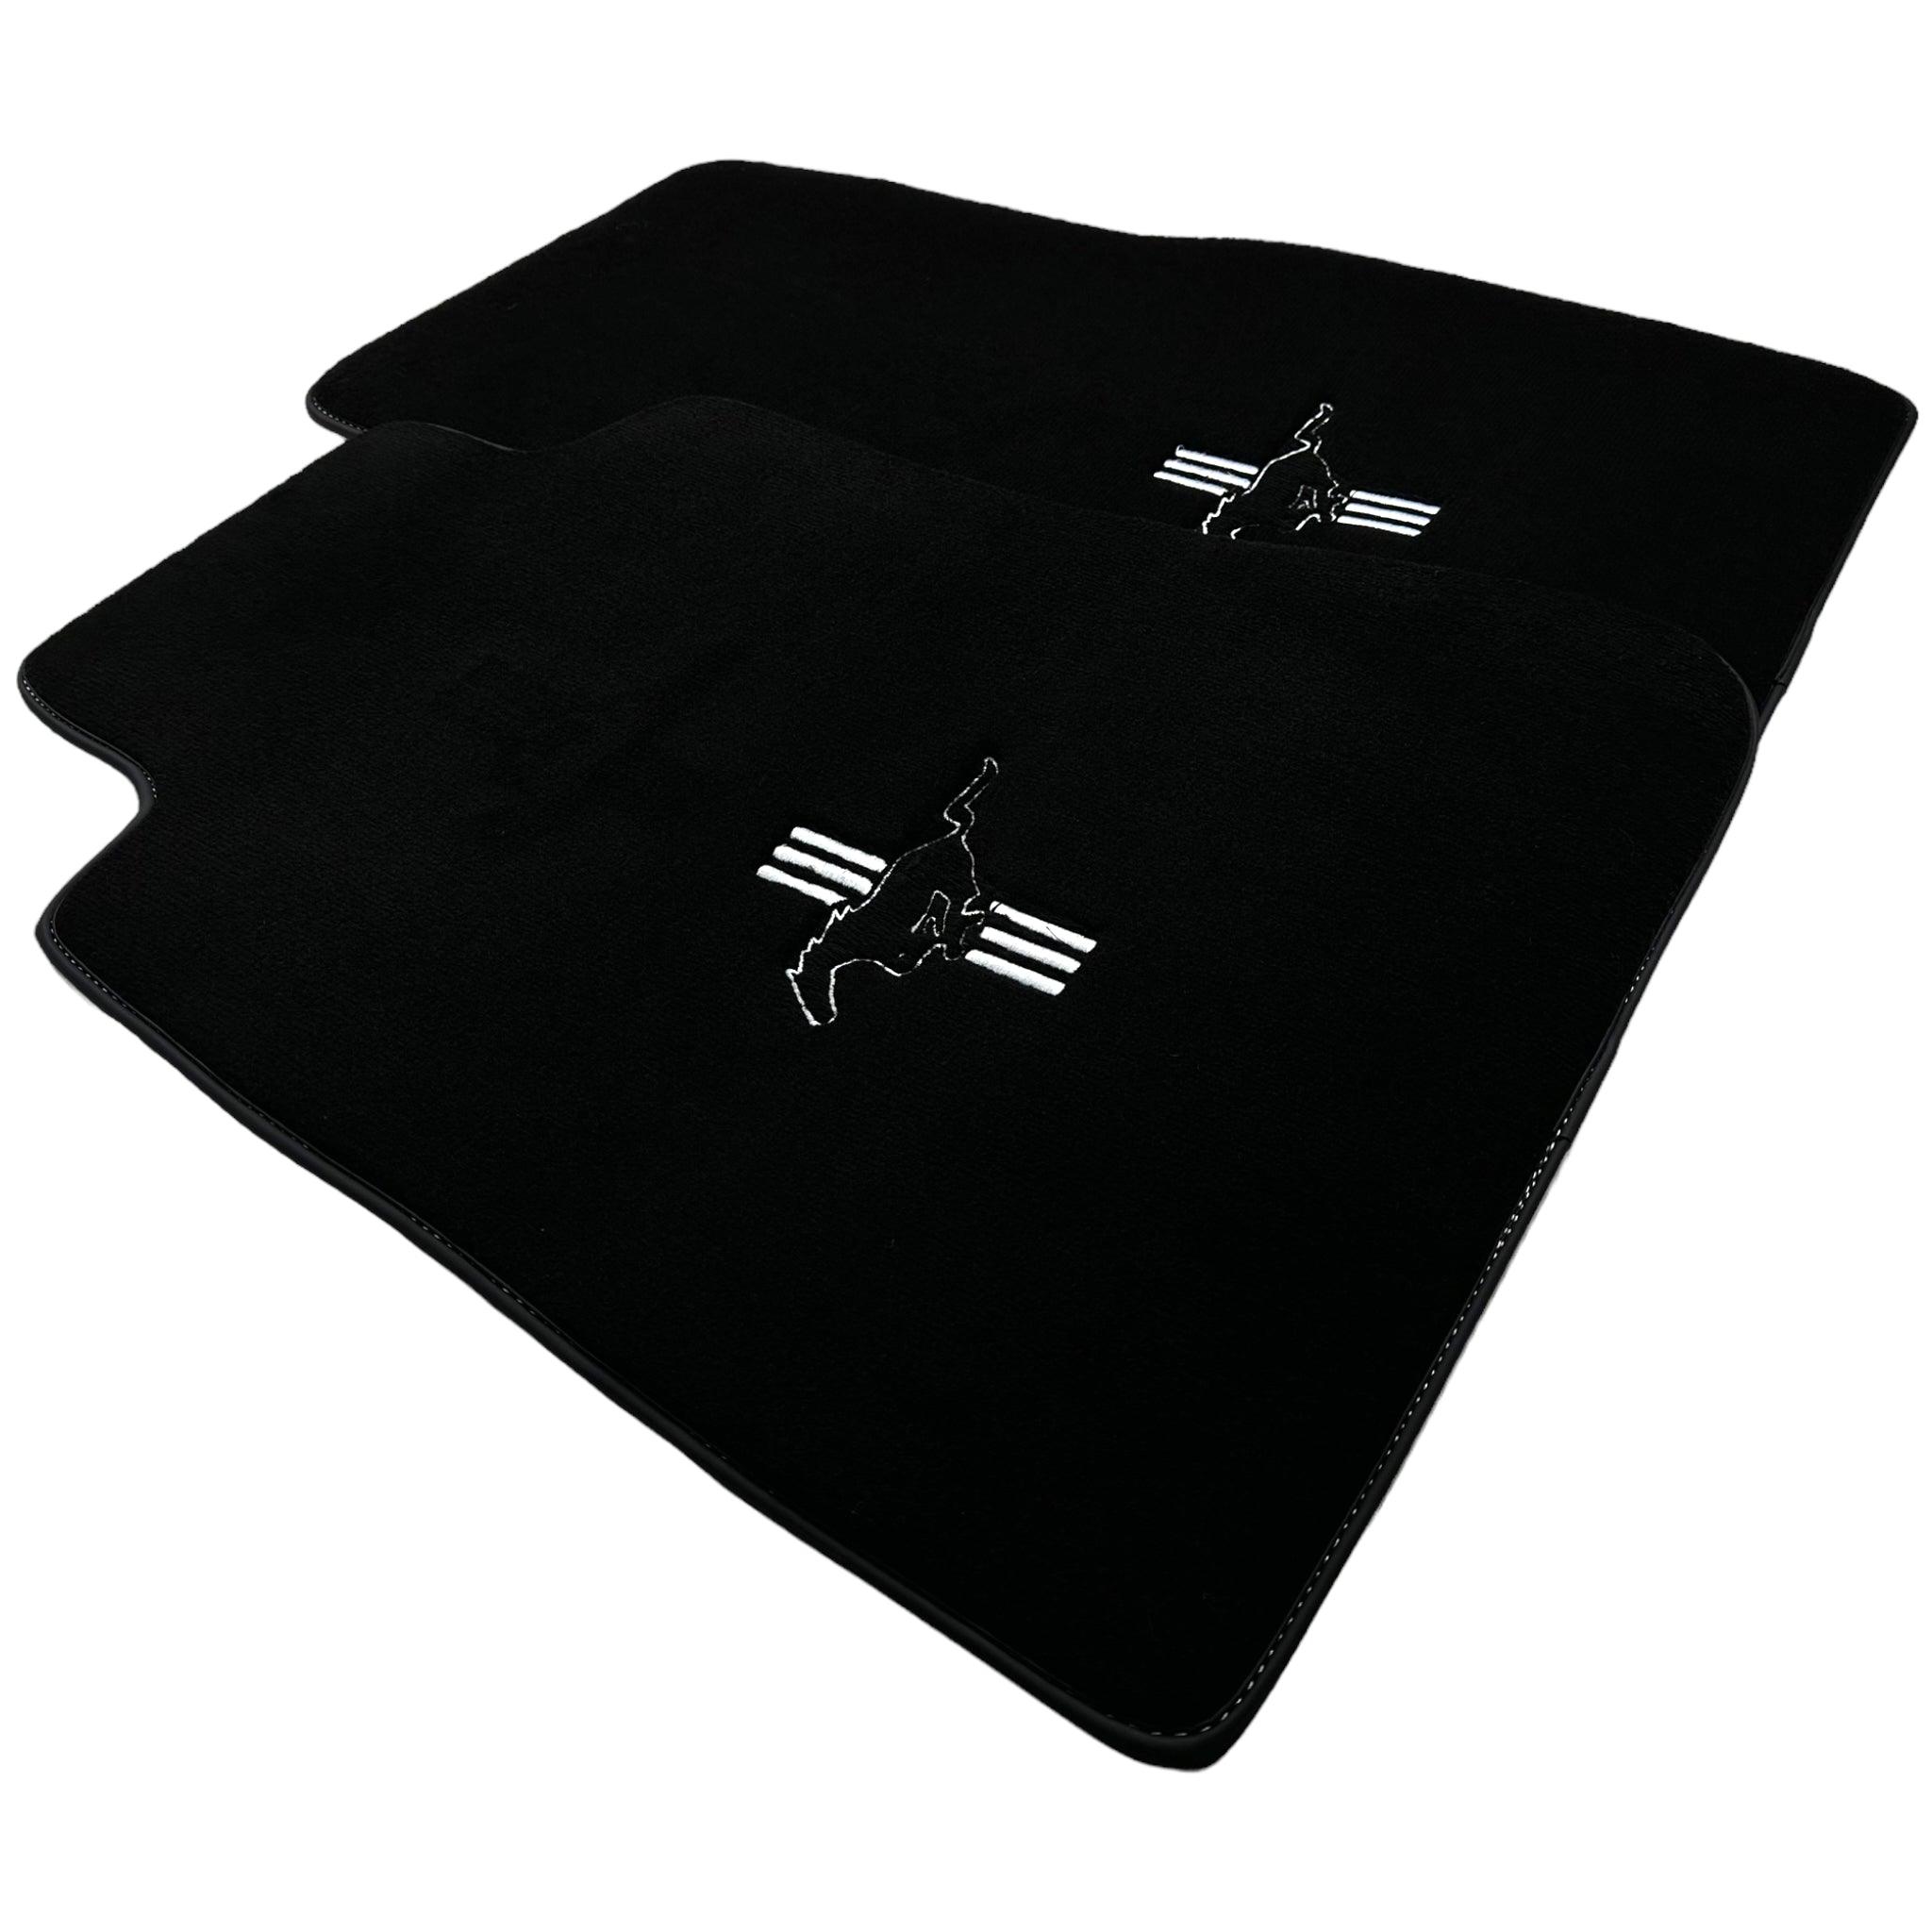 Black Floor Mats For Ford Mustang V (2004-2010) With Pony